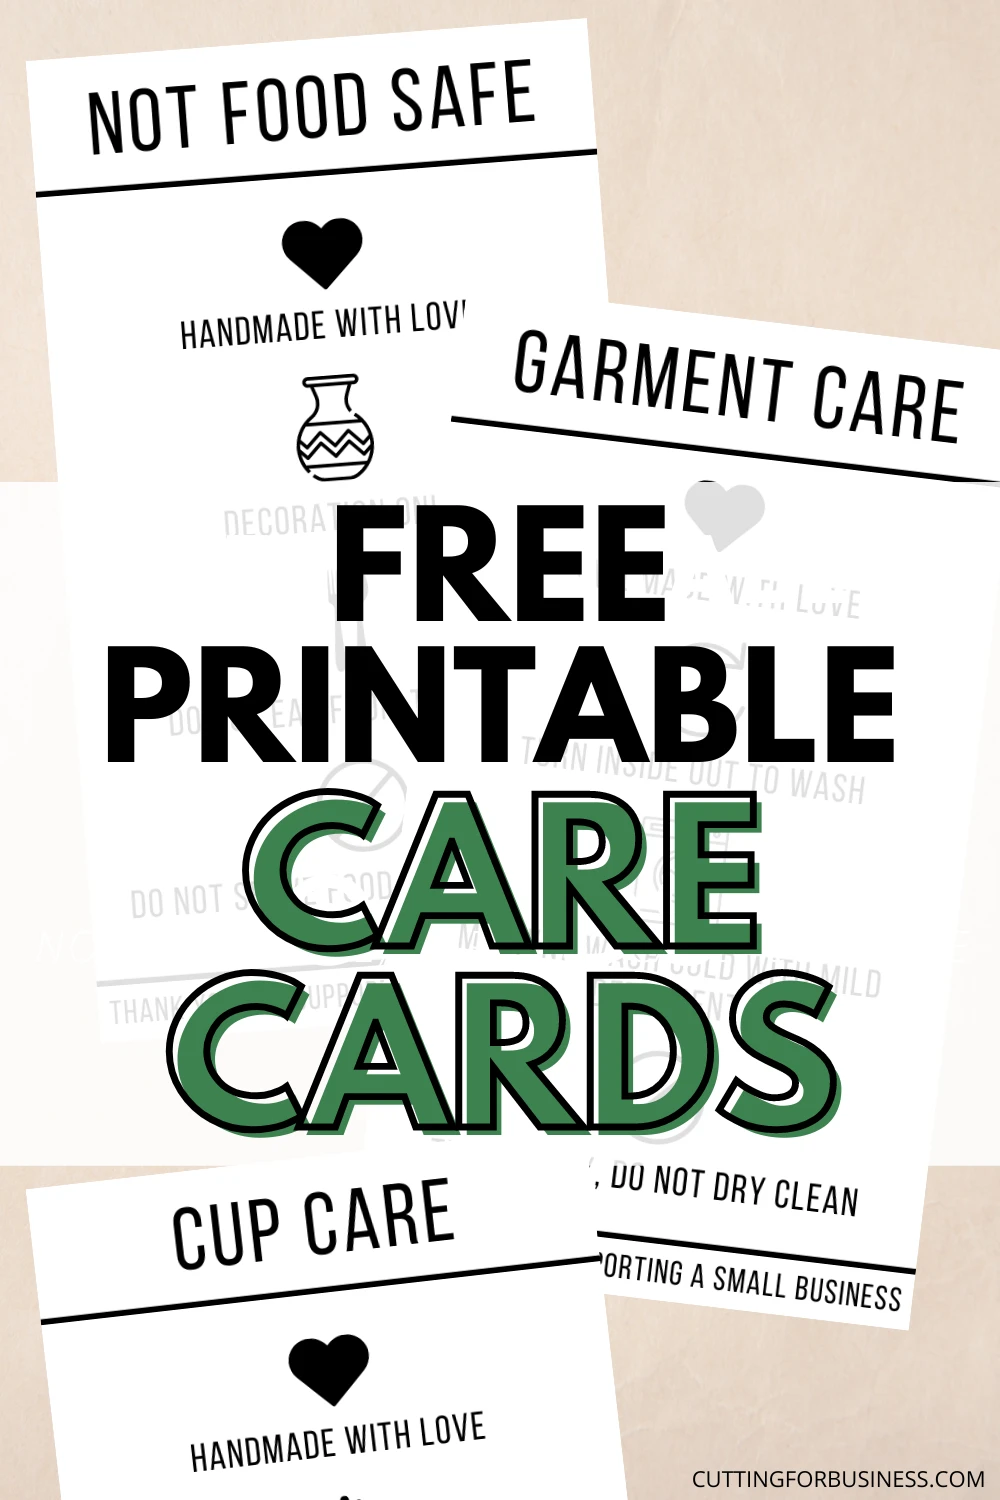 Replying to @chacetylezcano Printing & Cutting your Cup Care Cards! #